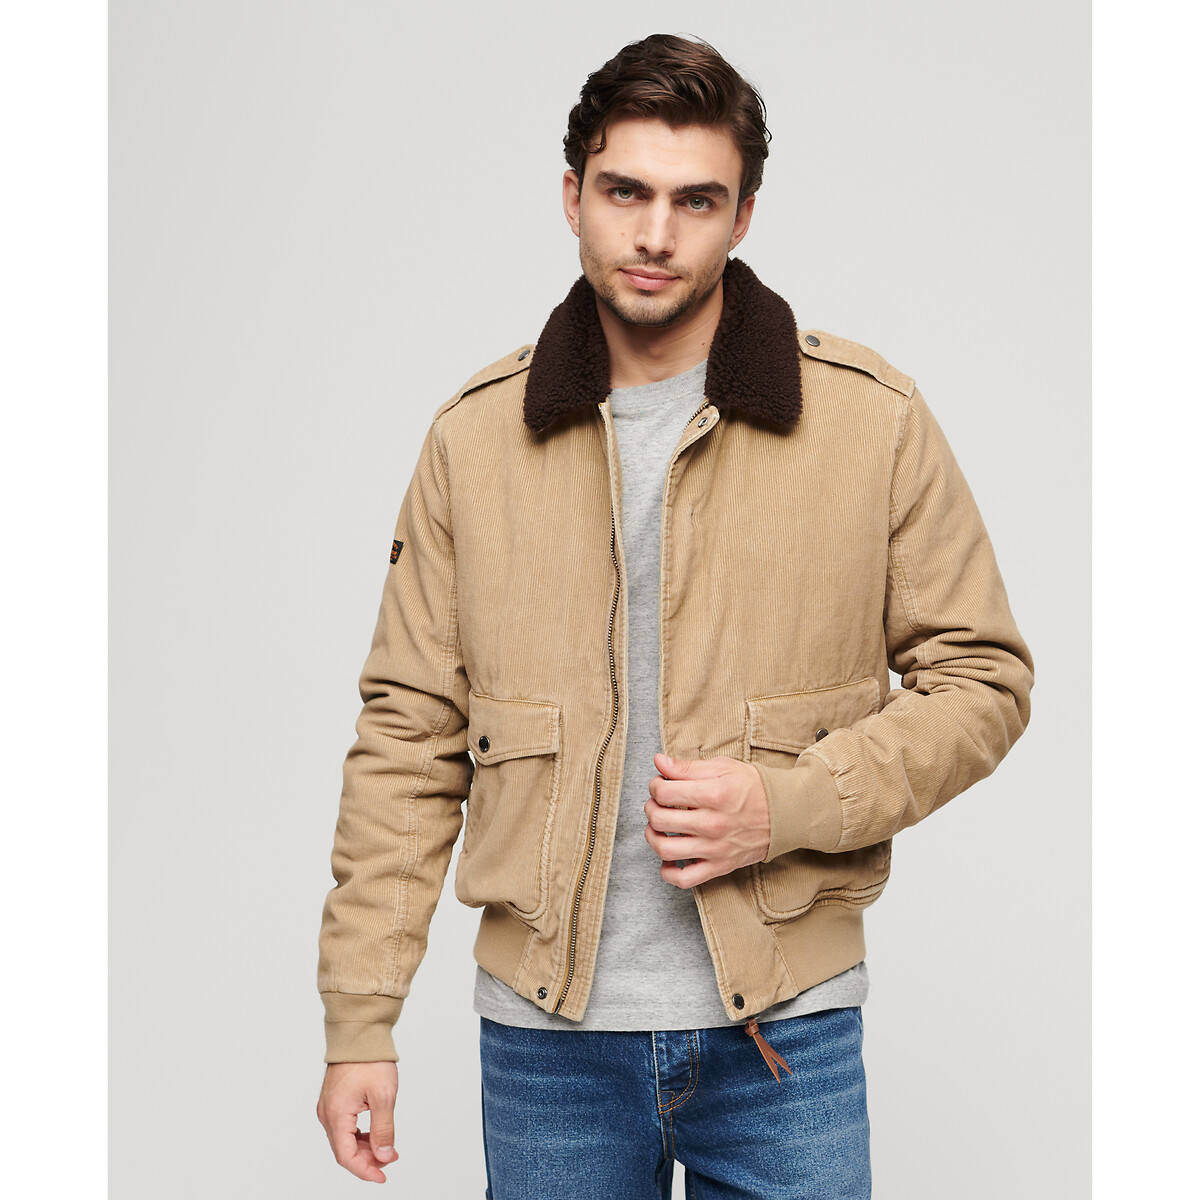 Image of Cotton Jacket with Corduroy Collar